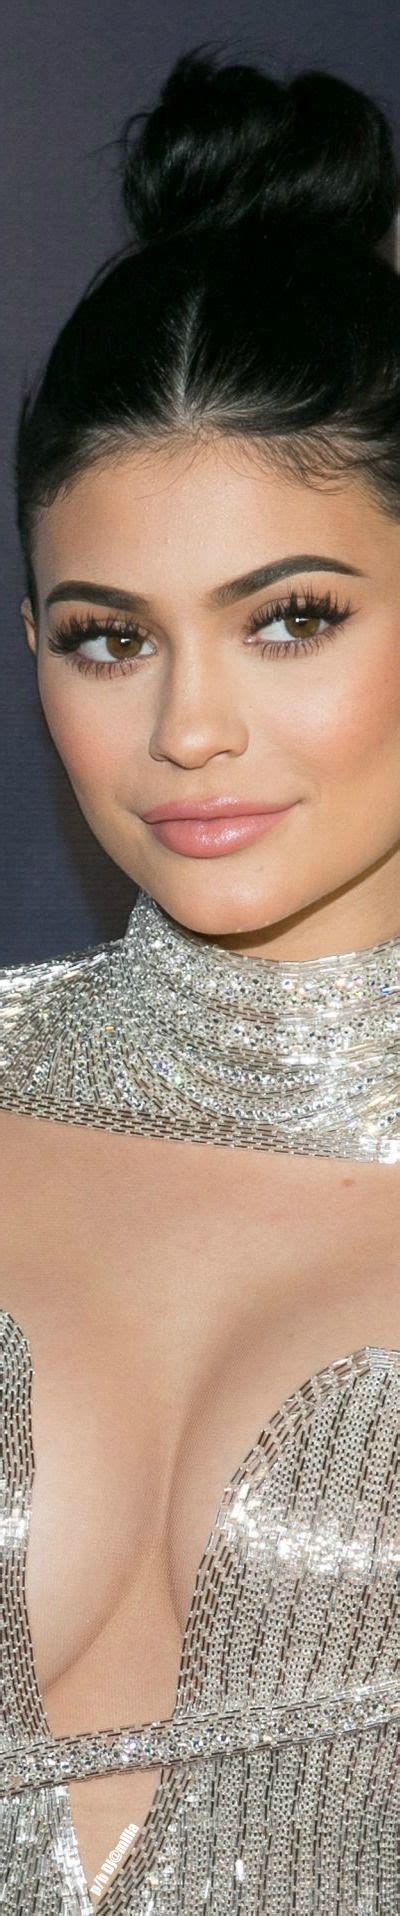 pin by kendall jenner ©️ on grey and silver jenner hair